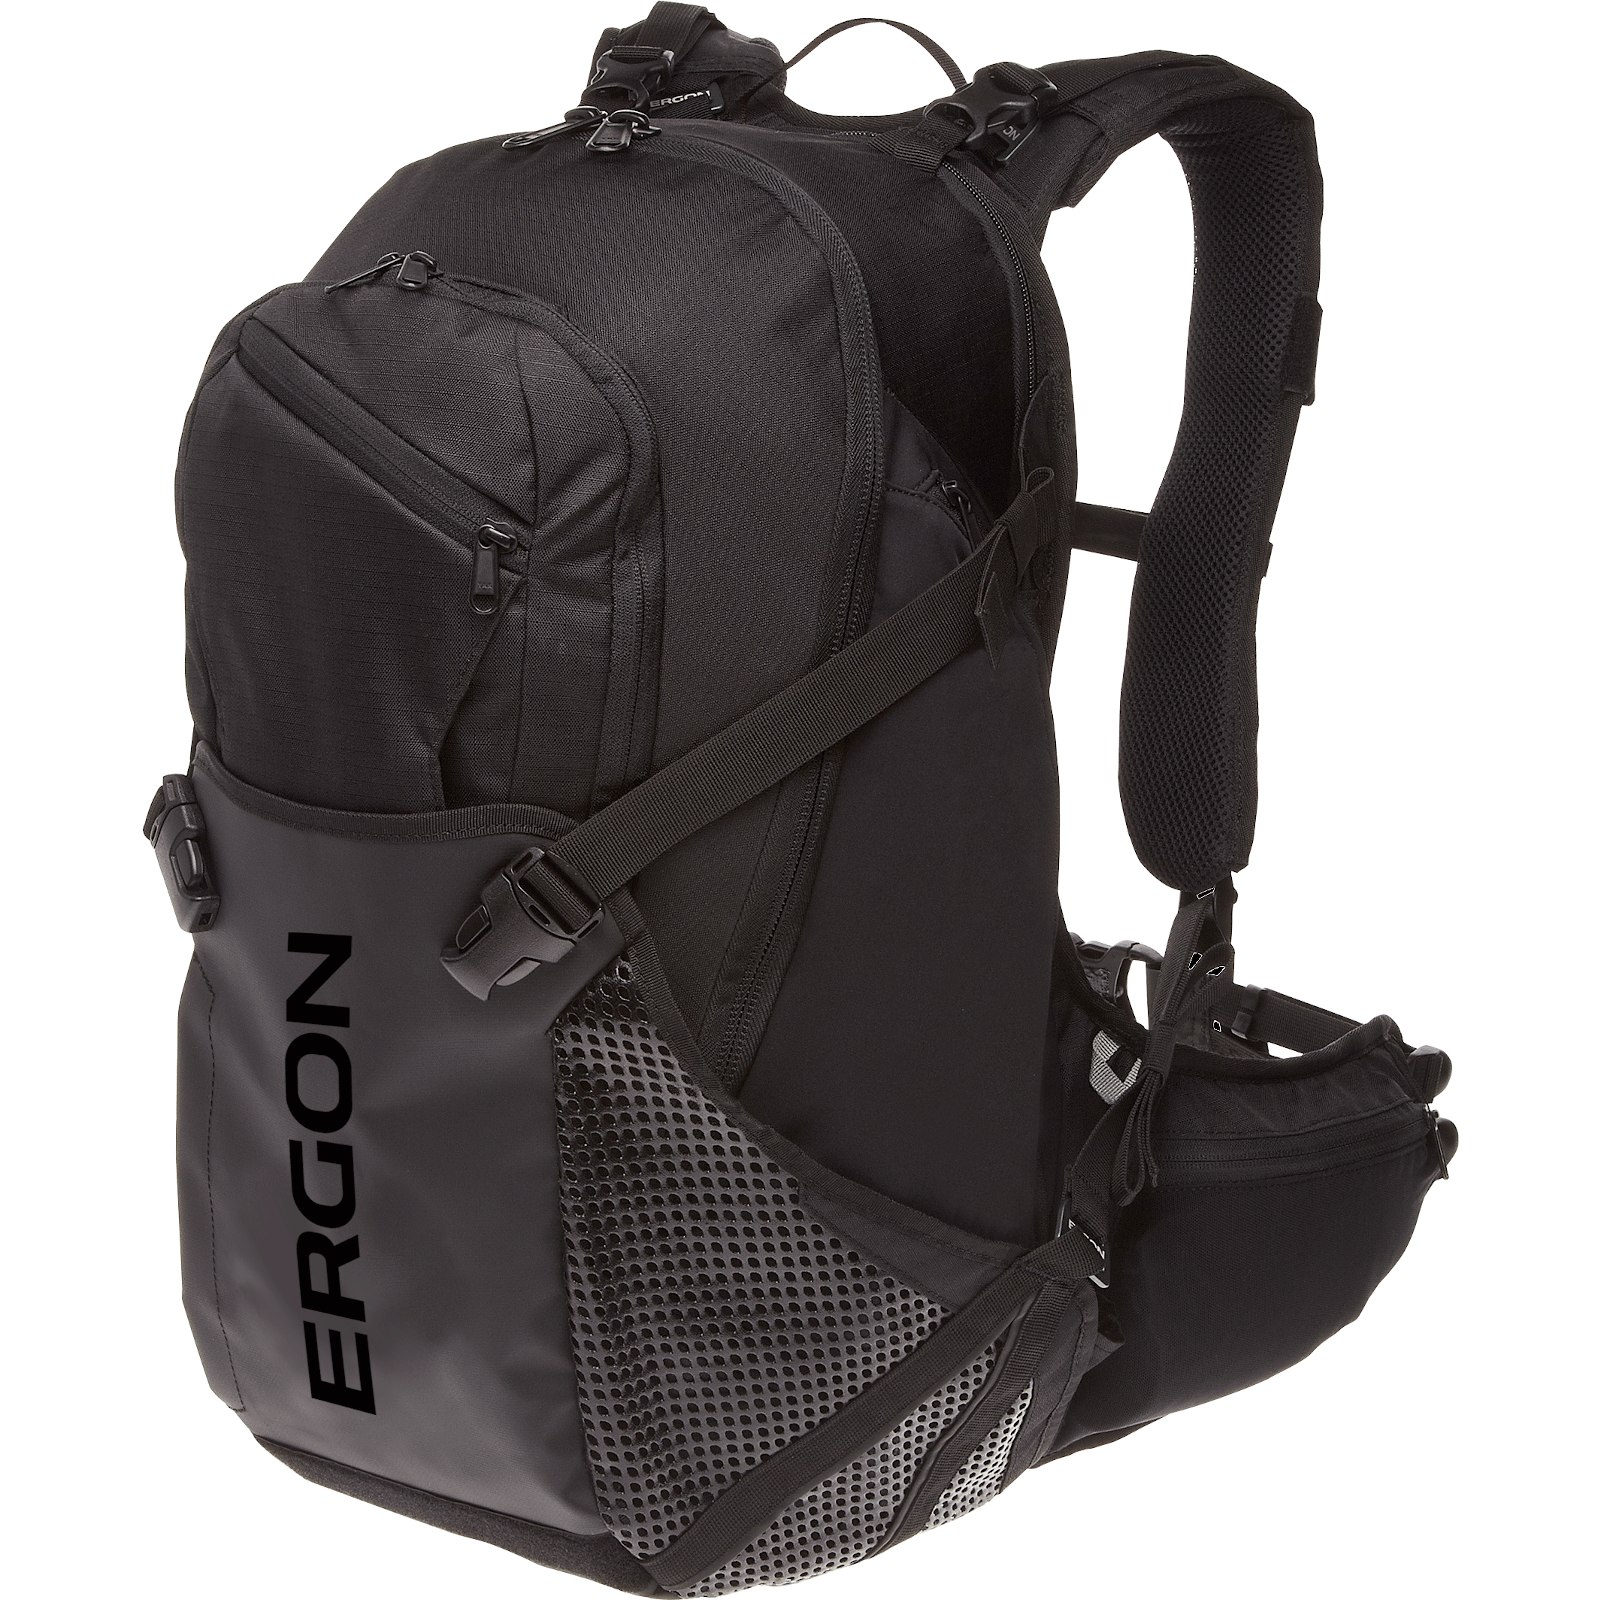 Picture of Ergon BX4 Evo Backpack - black stealth